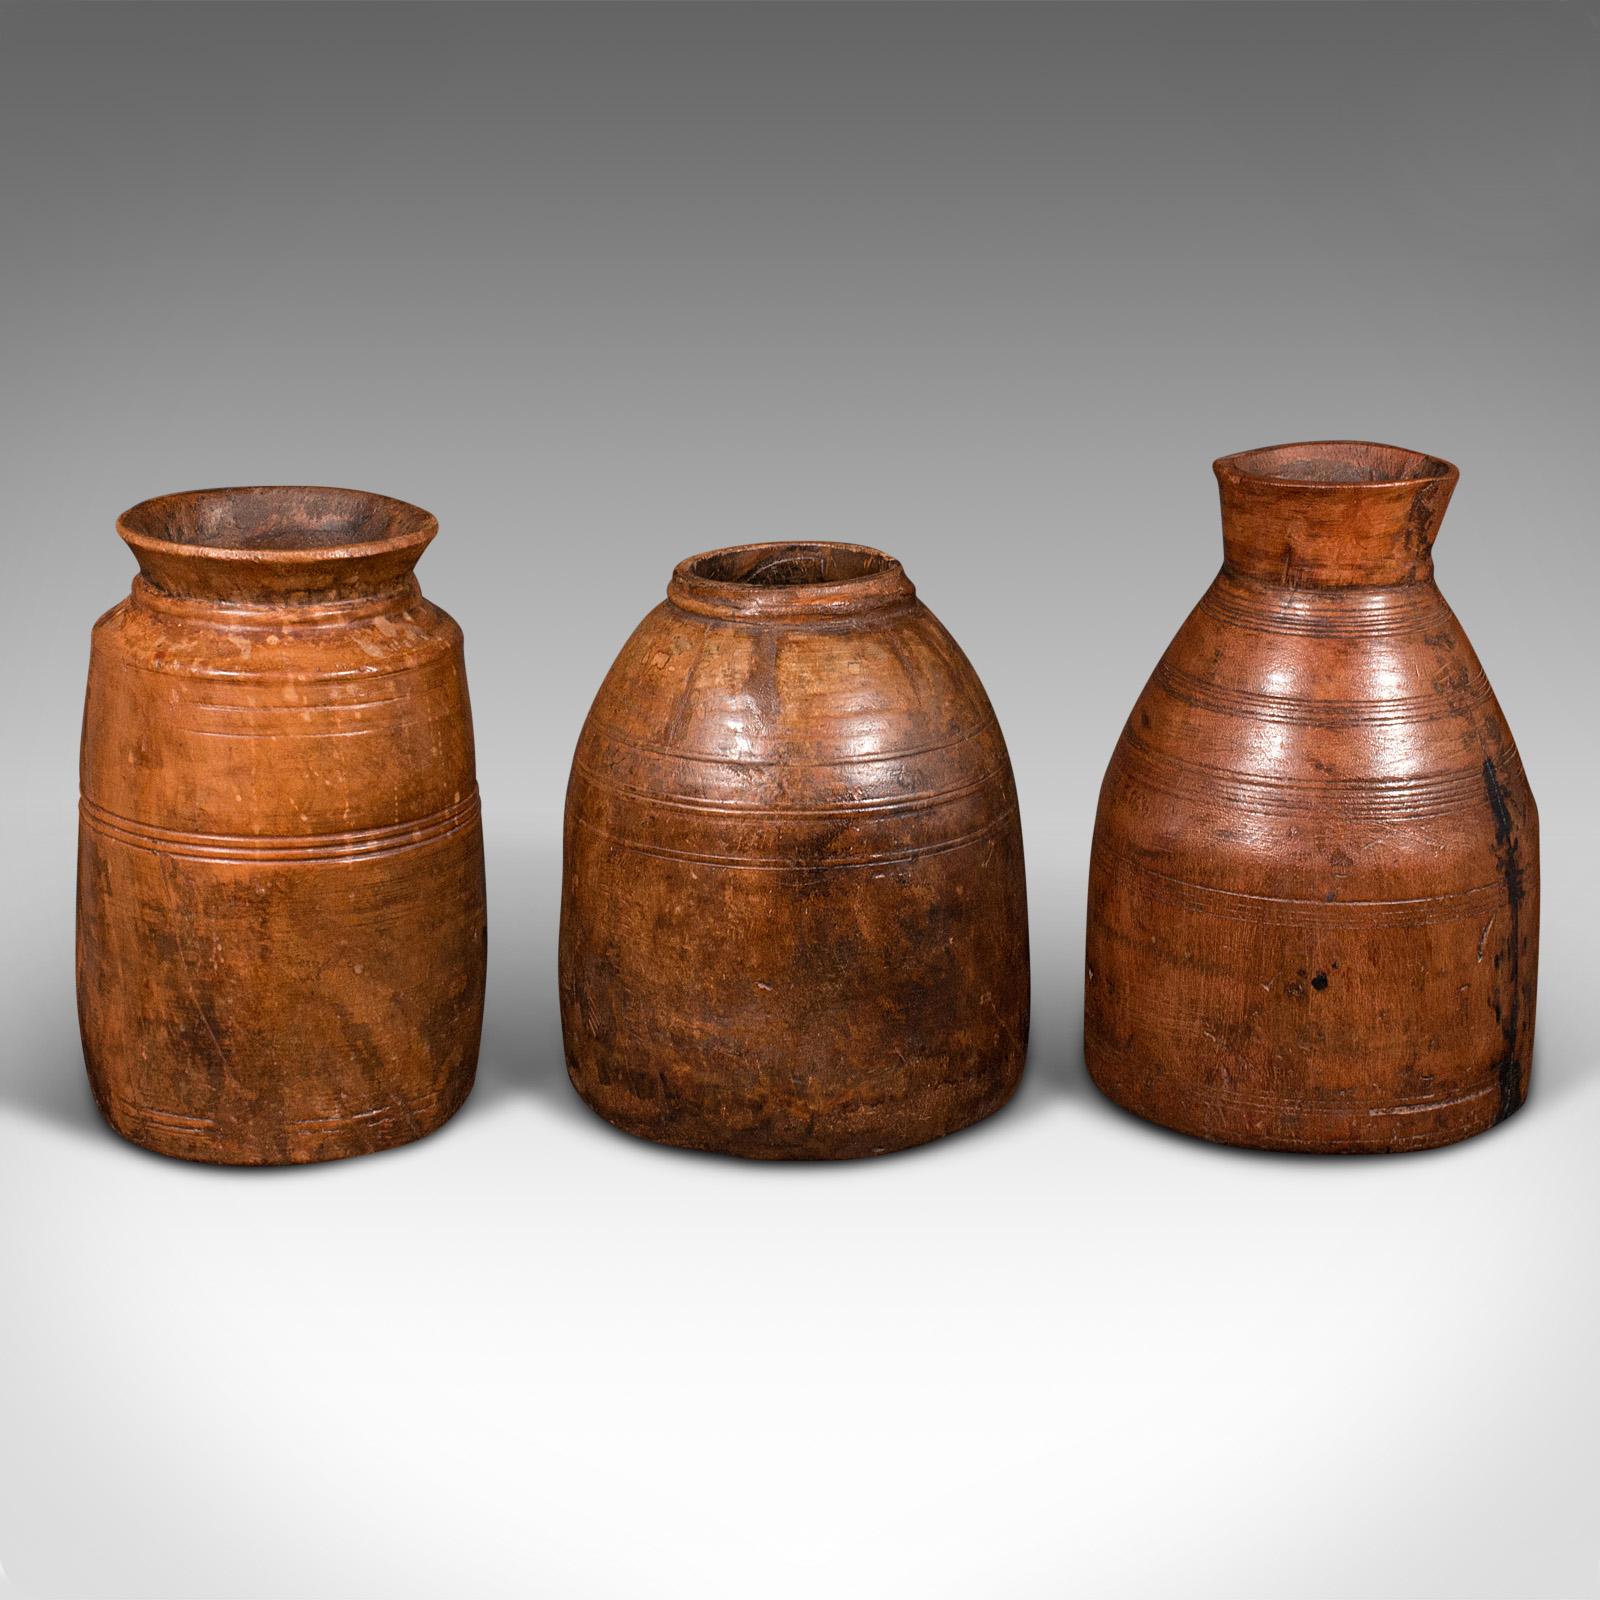 This is a set of 3 antique tribal vases. An Indian, hardwood rustic jar or urn, dating to the late Victorian period, circa 1900.

Each offers naive craftsmanship and a charming appearance
Displaying a desirable aged patina throughout
Hand-carved